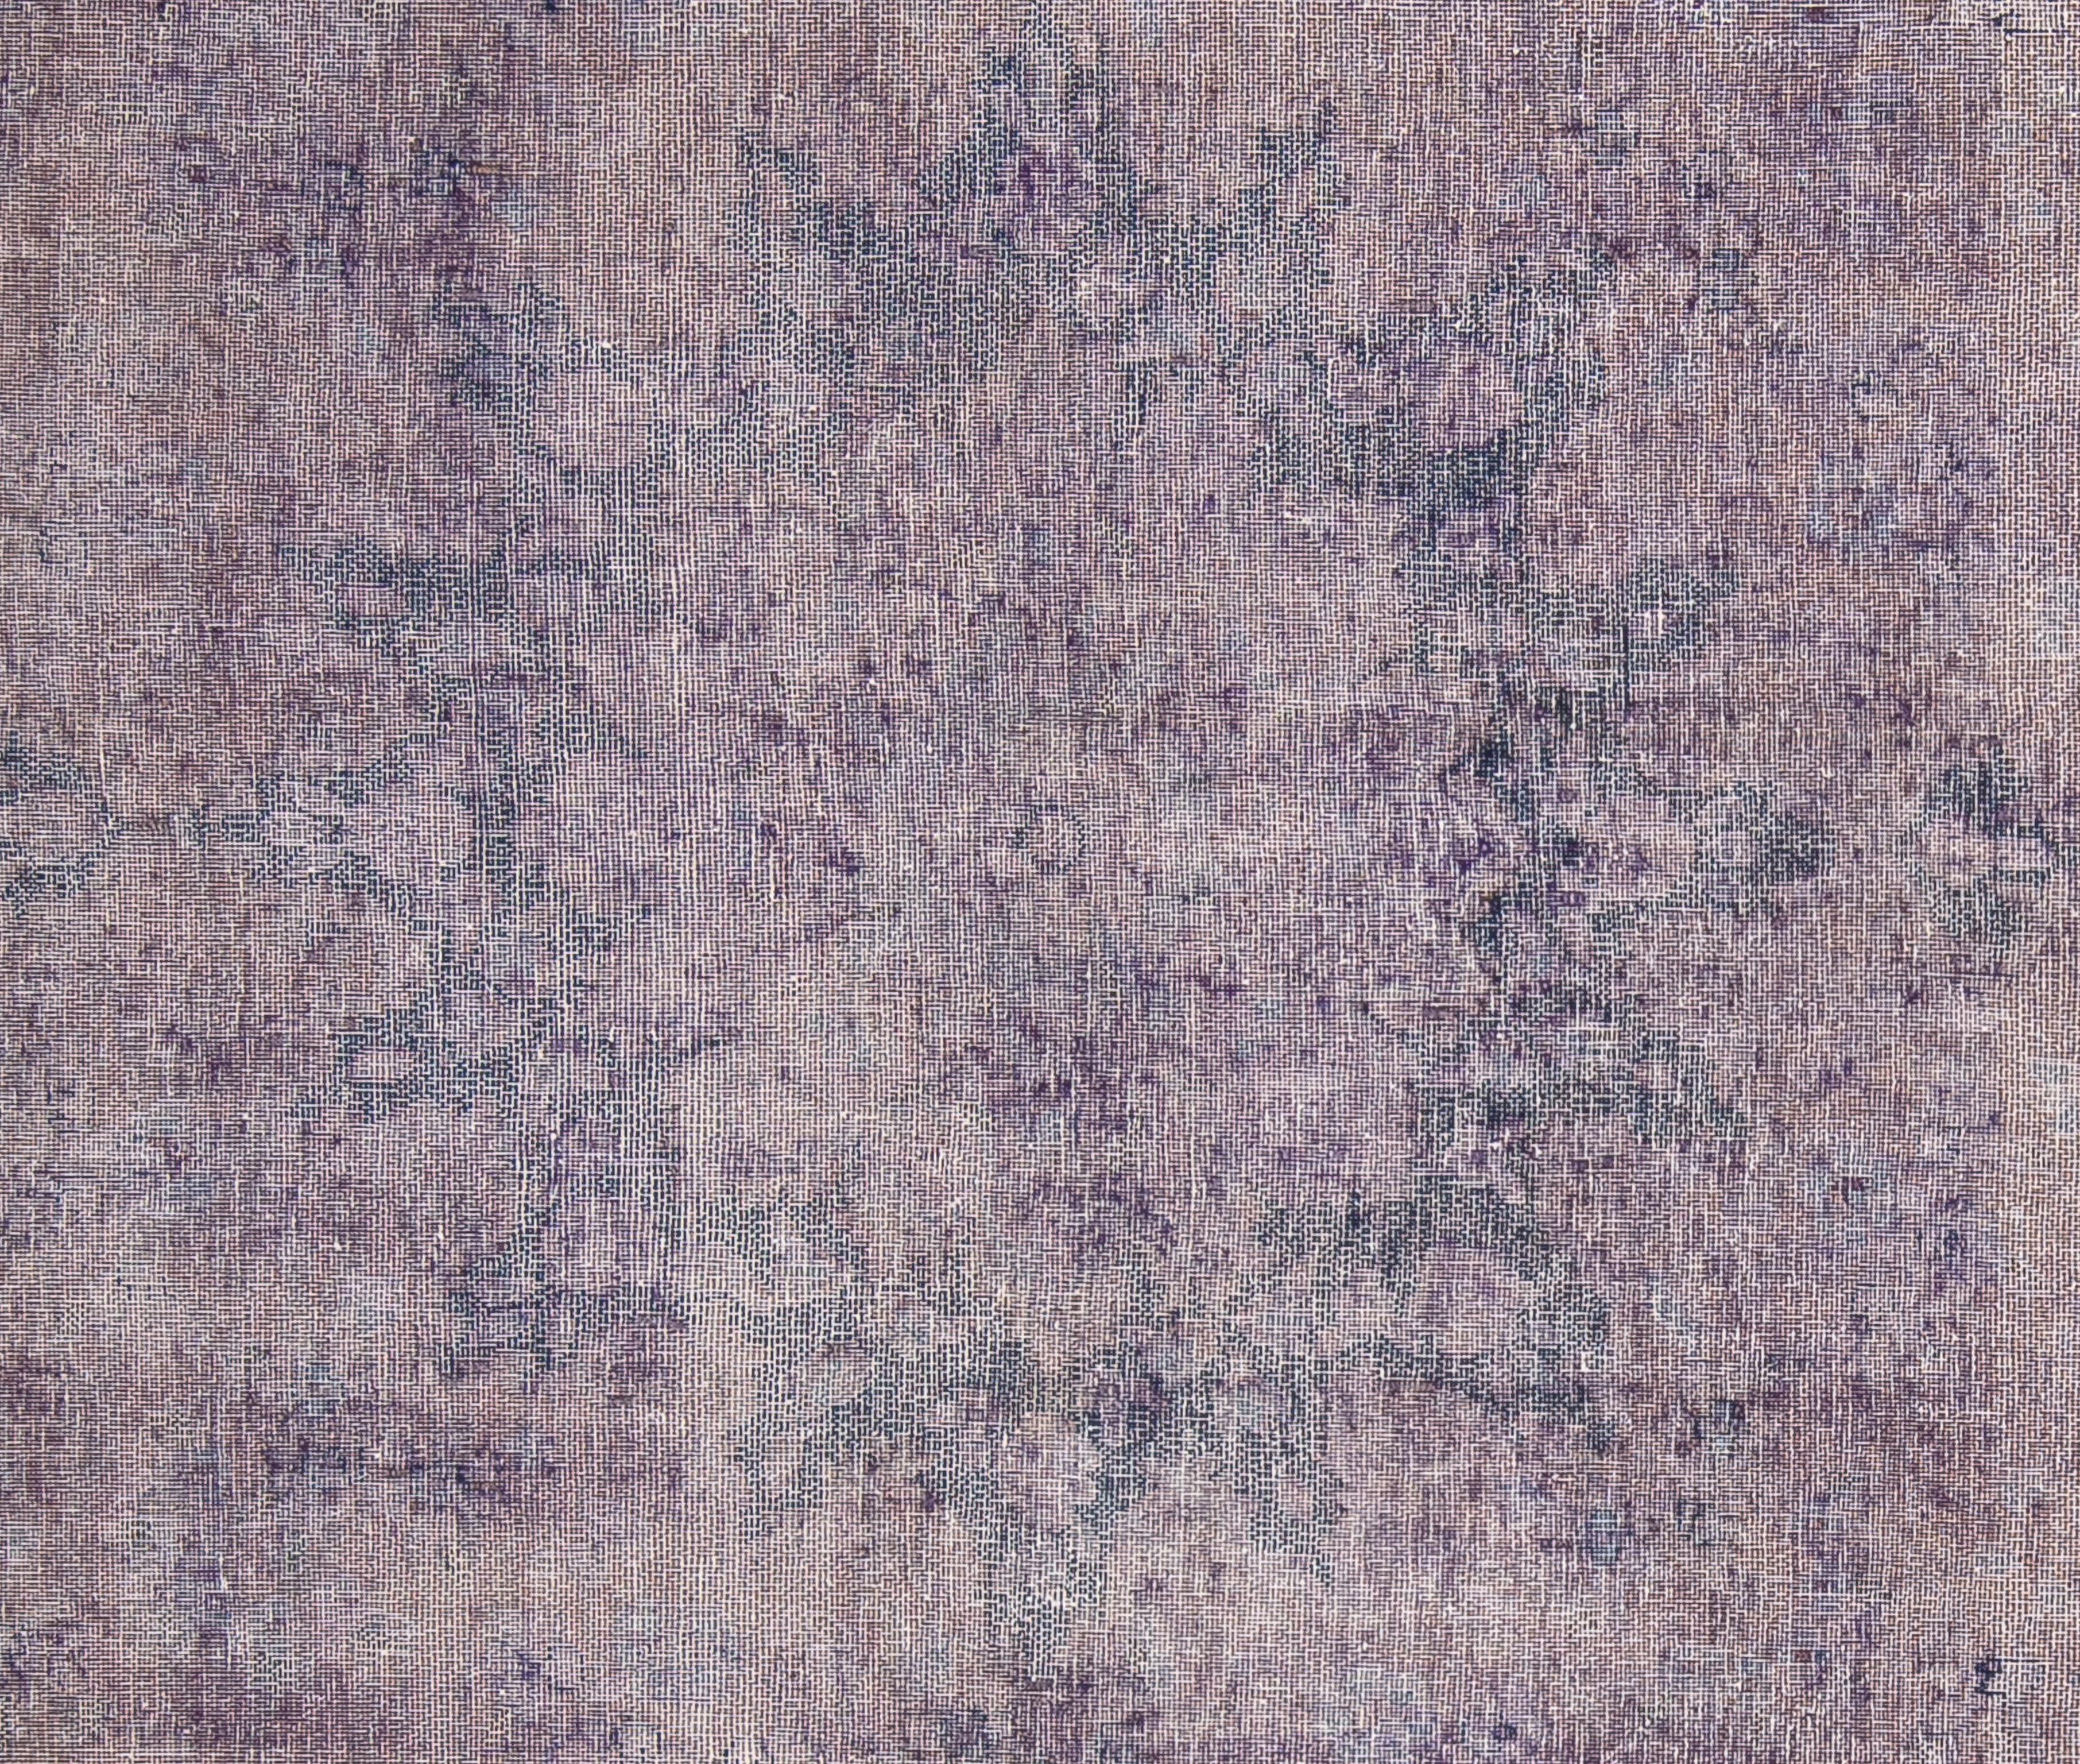 This elegant one-of-a-kind oushak possesses a cool pallet with superb color, displaying an amethyst background and border with subtle black features throughout. From Turkey, overdyed and beautifully woven with 100% handspun New Zealand wool.

Size -